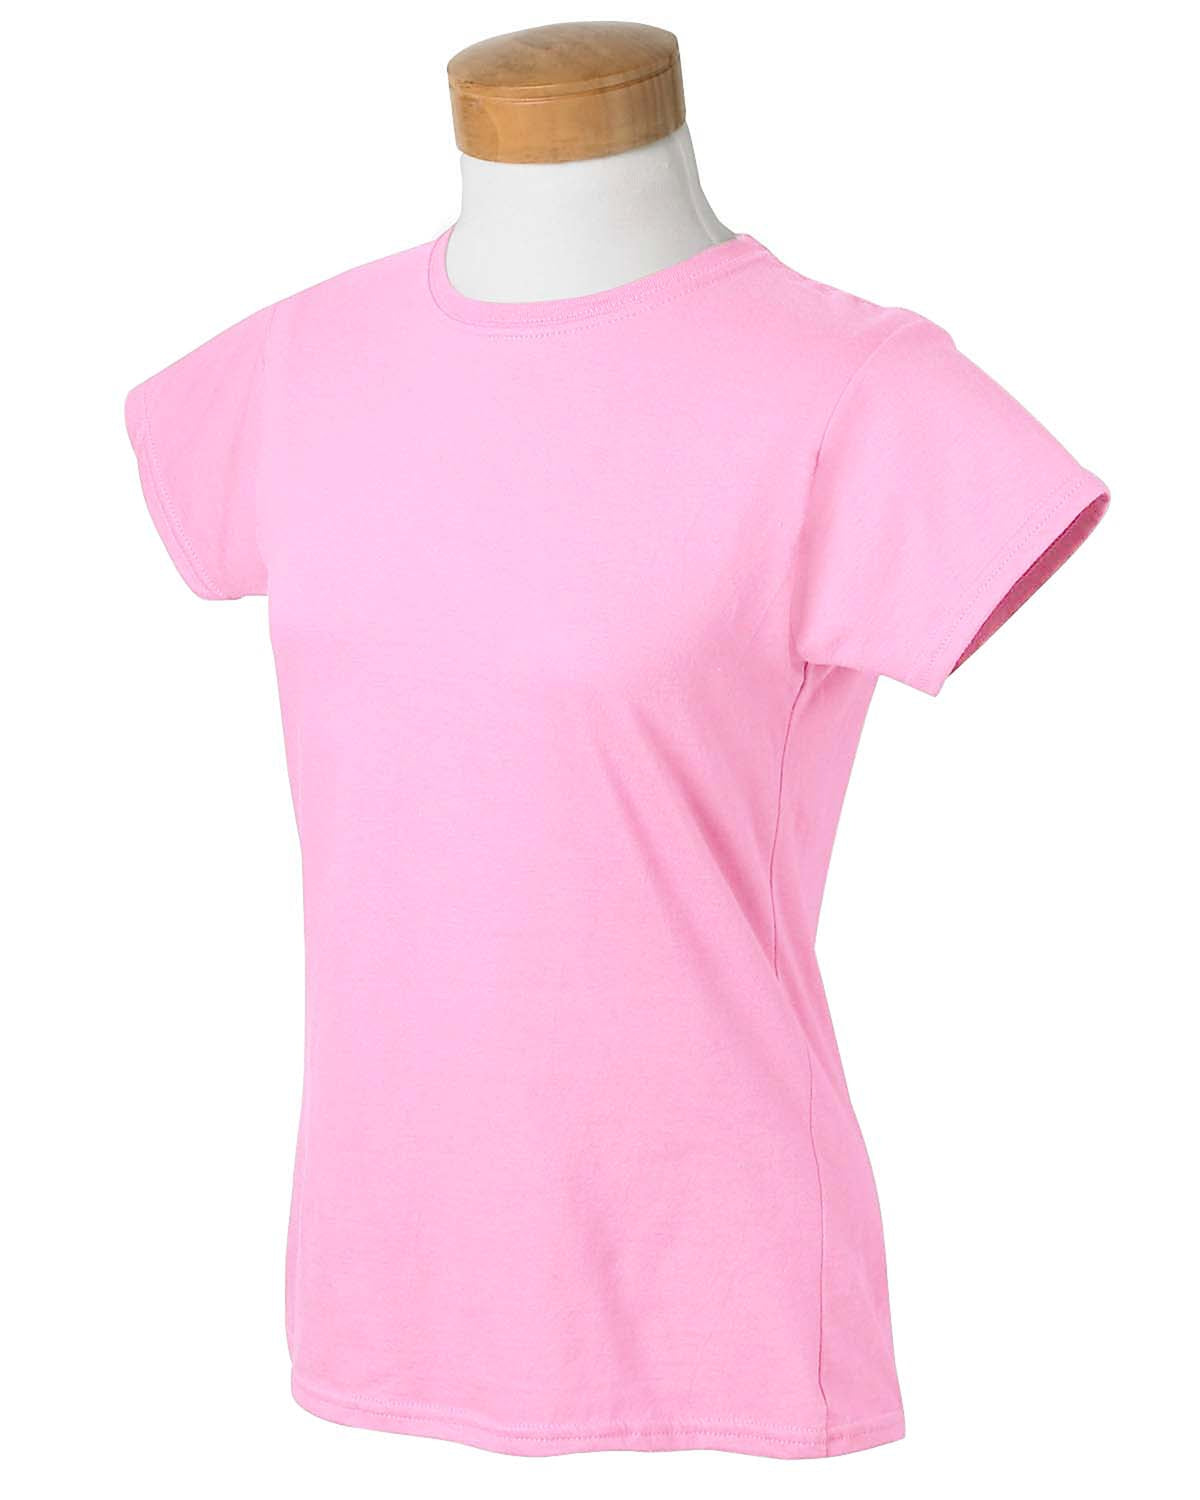 gildan womens softstyle fitted tee light pink